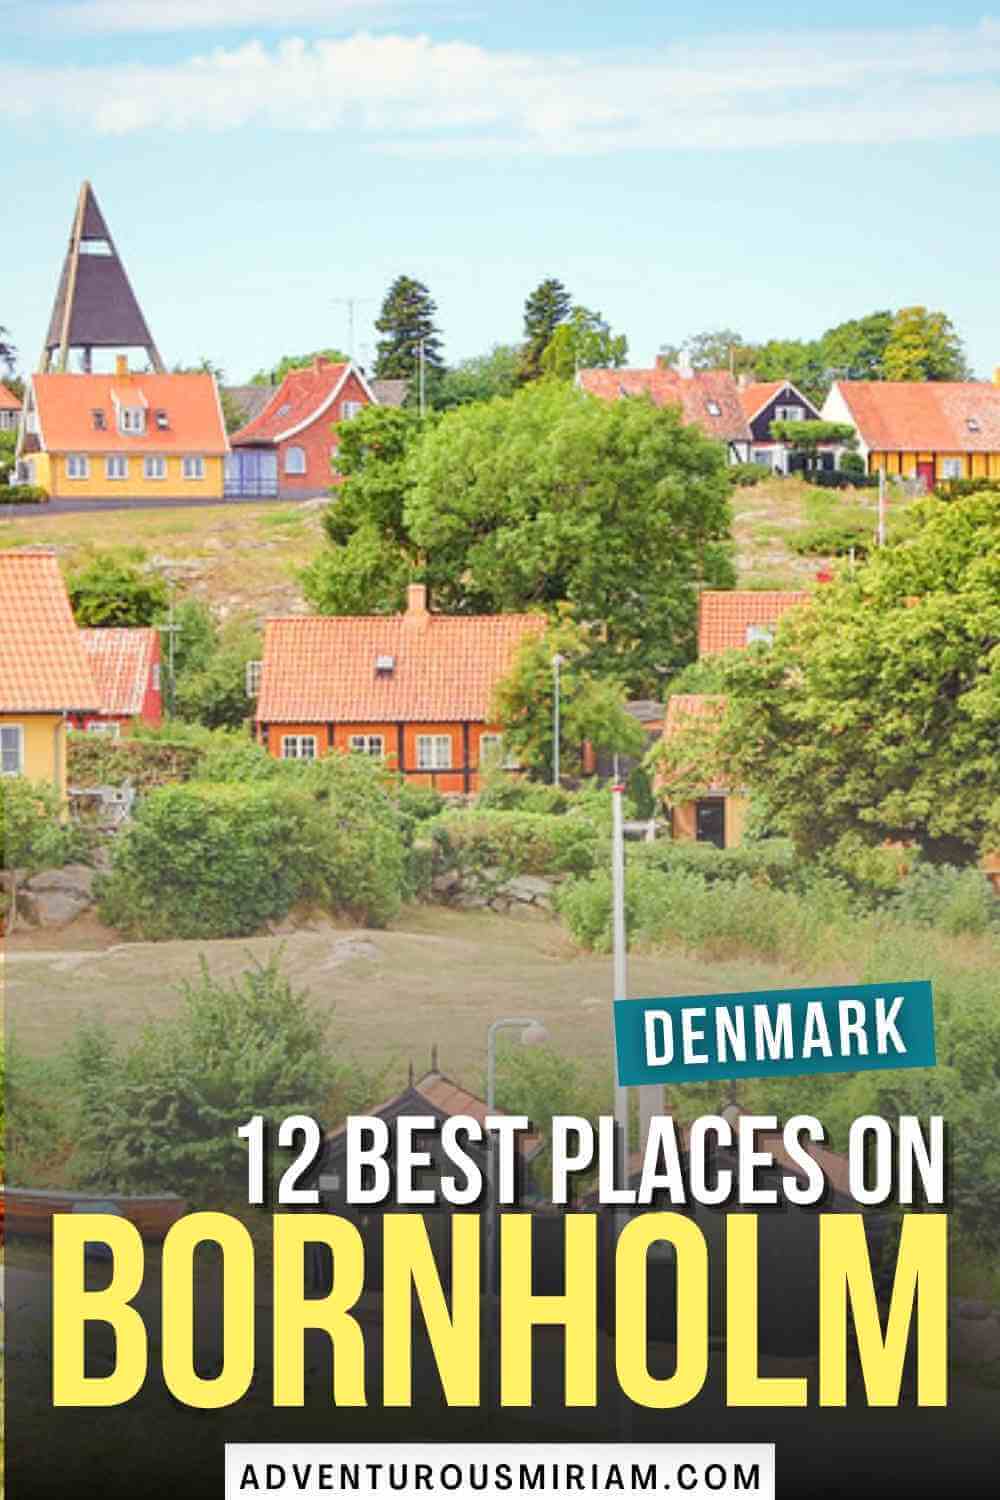 Want to visit a fairy tale island? Bornholm island in Denmark is the perfect place for it with its time warp, magical forests, medieval fortresses and glorious organic food. Find out what to do in Bornholm Denmark and how to get there easily from Copenhagen. #bornholm #denmark #visitdenmark #travel